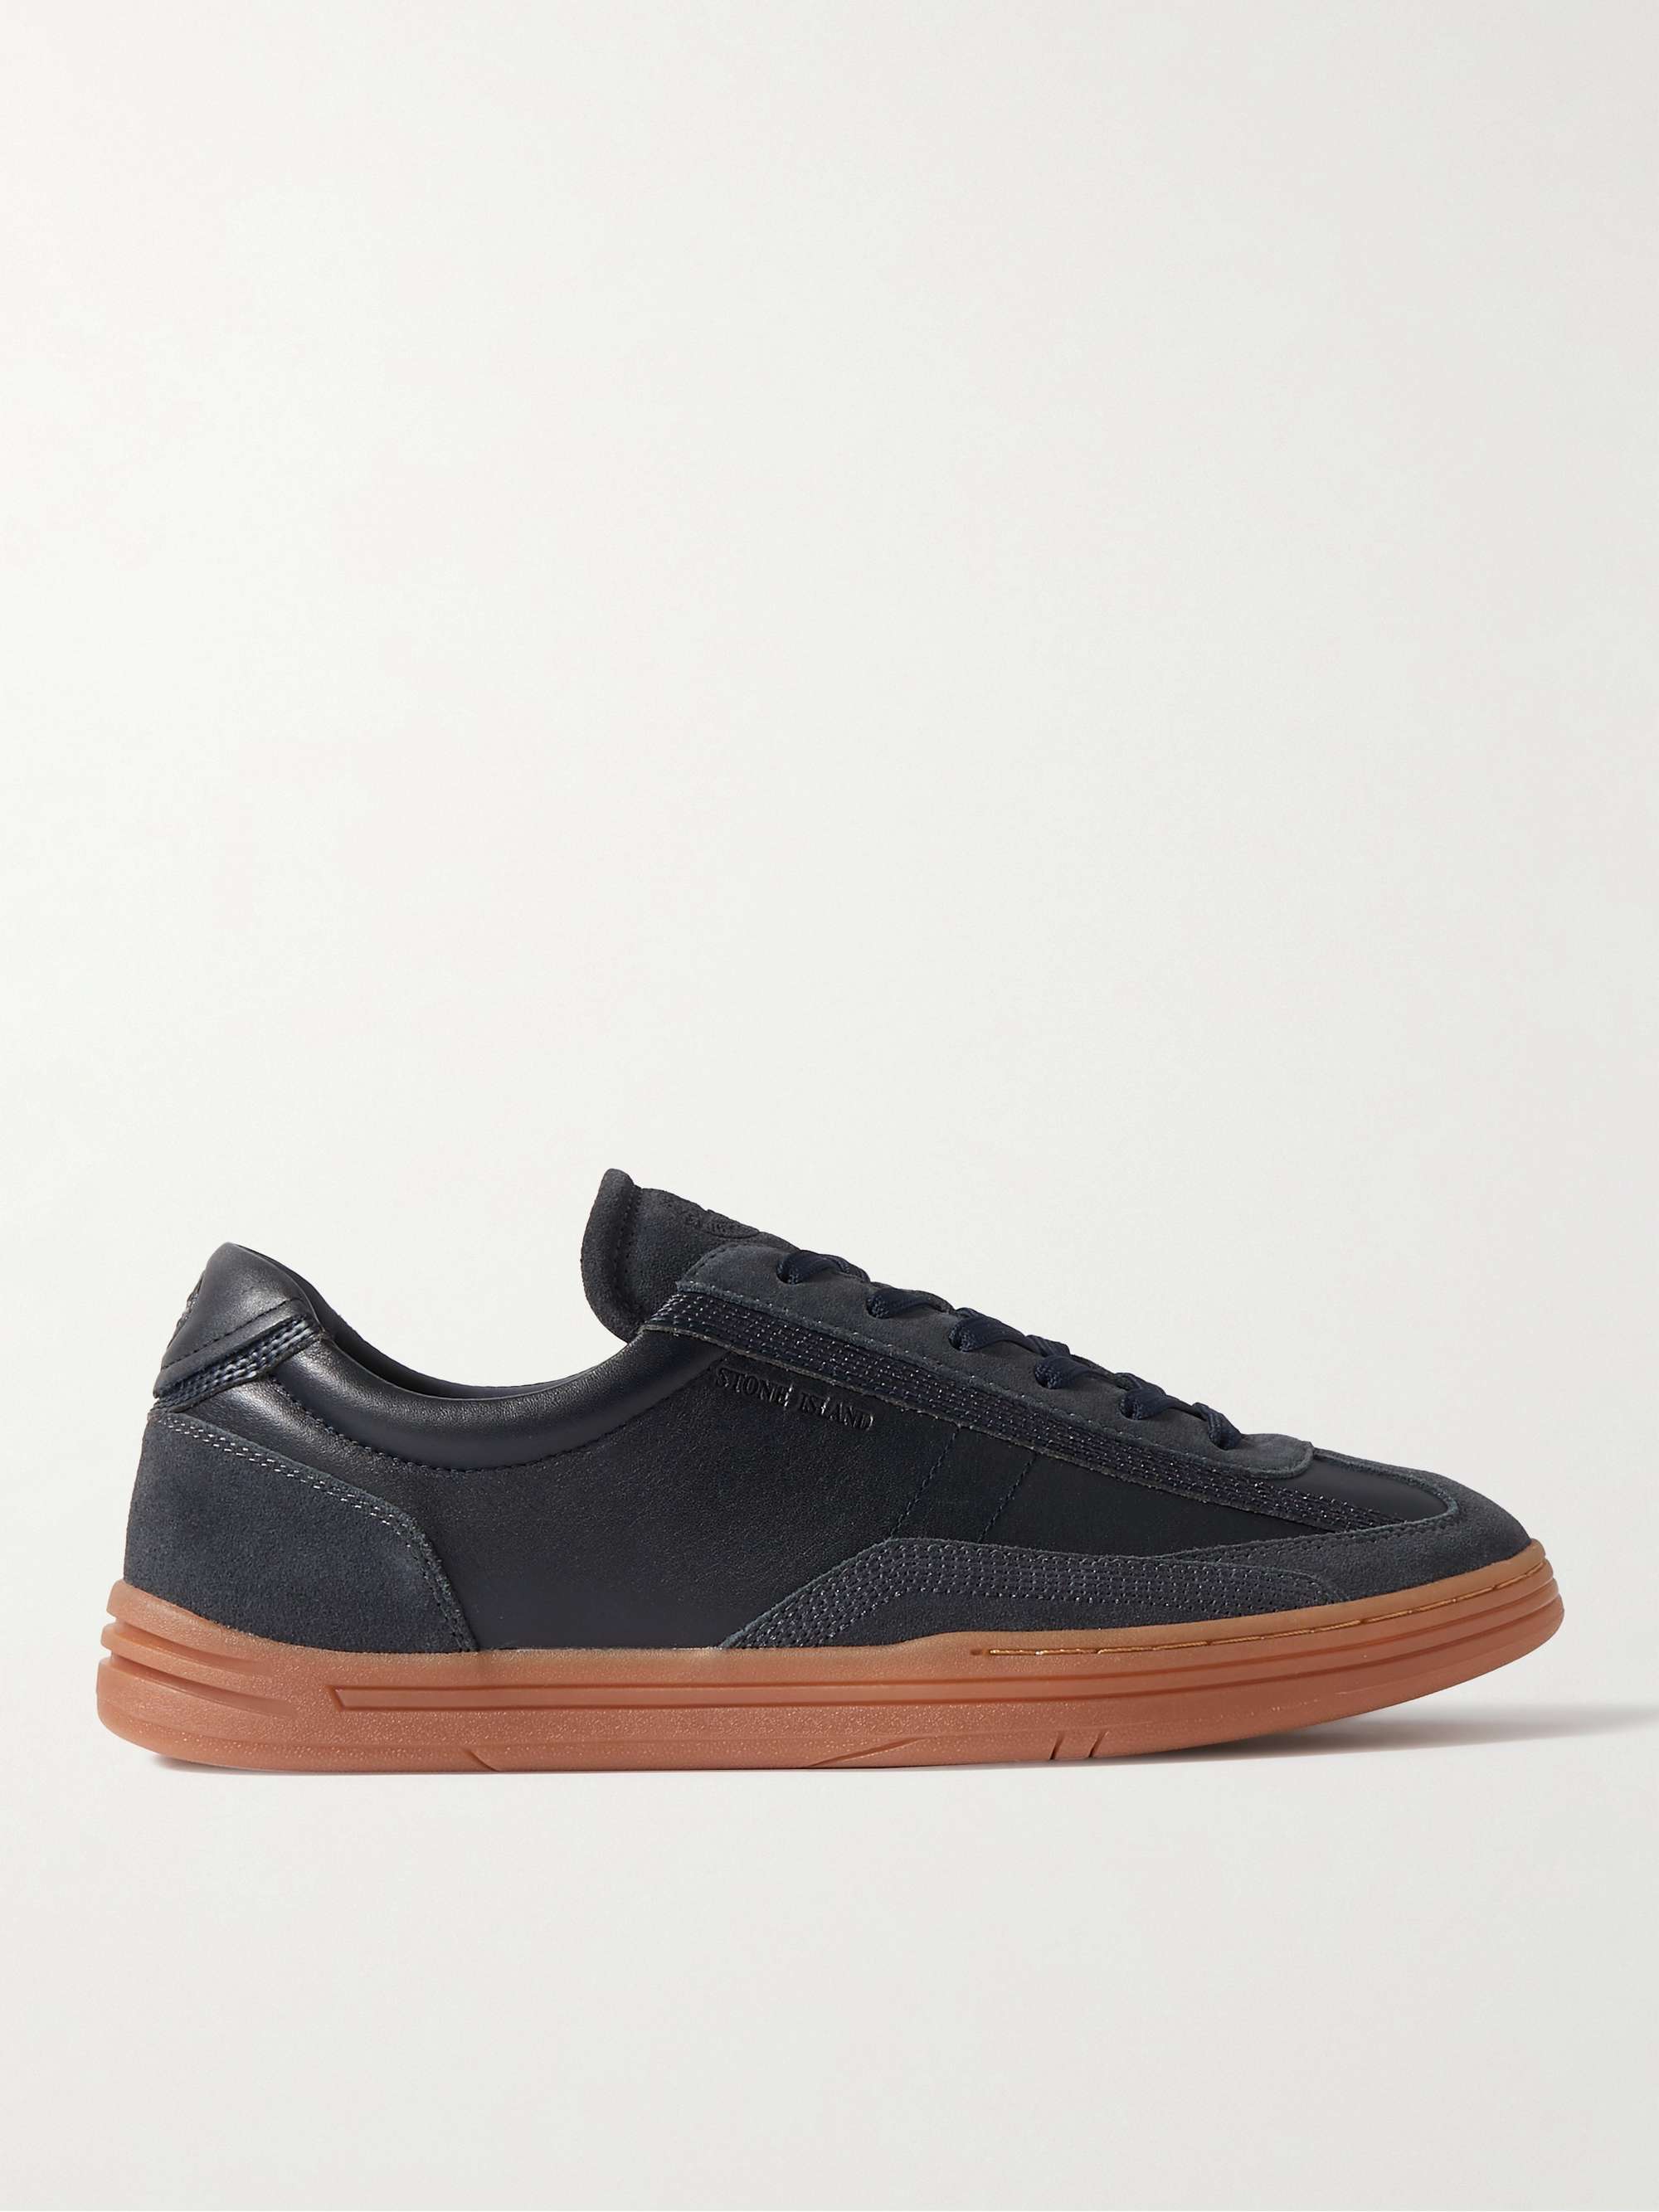 STONE ISLAND Rock Suede-Trimmed Leather Sneakers for Men | MR PORTER